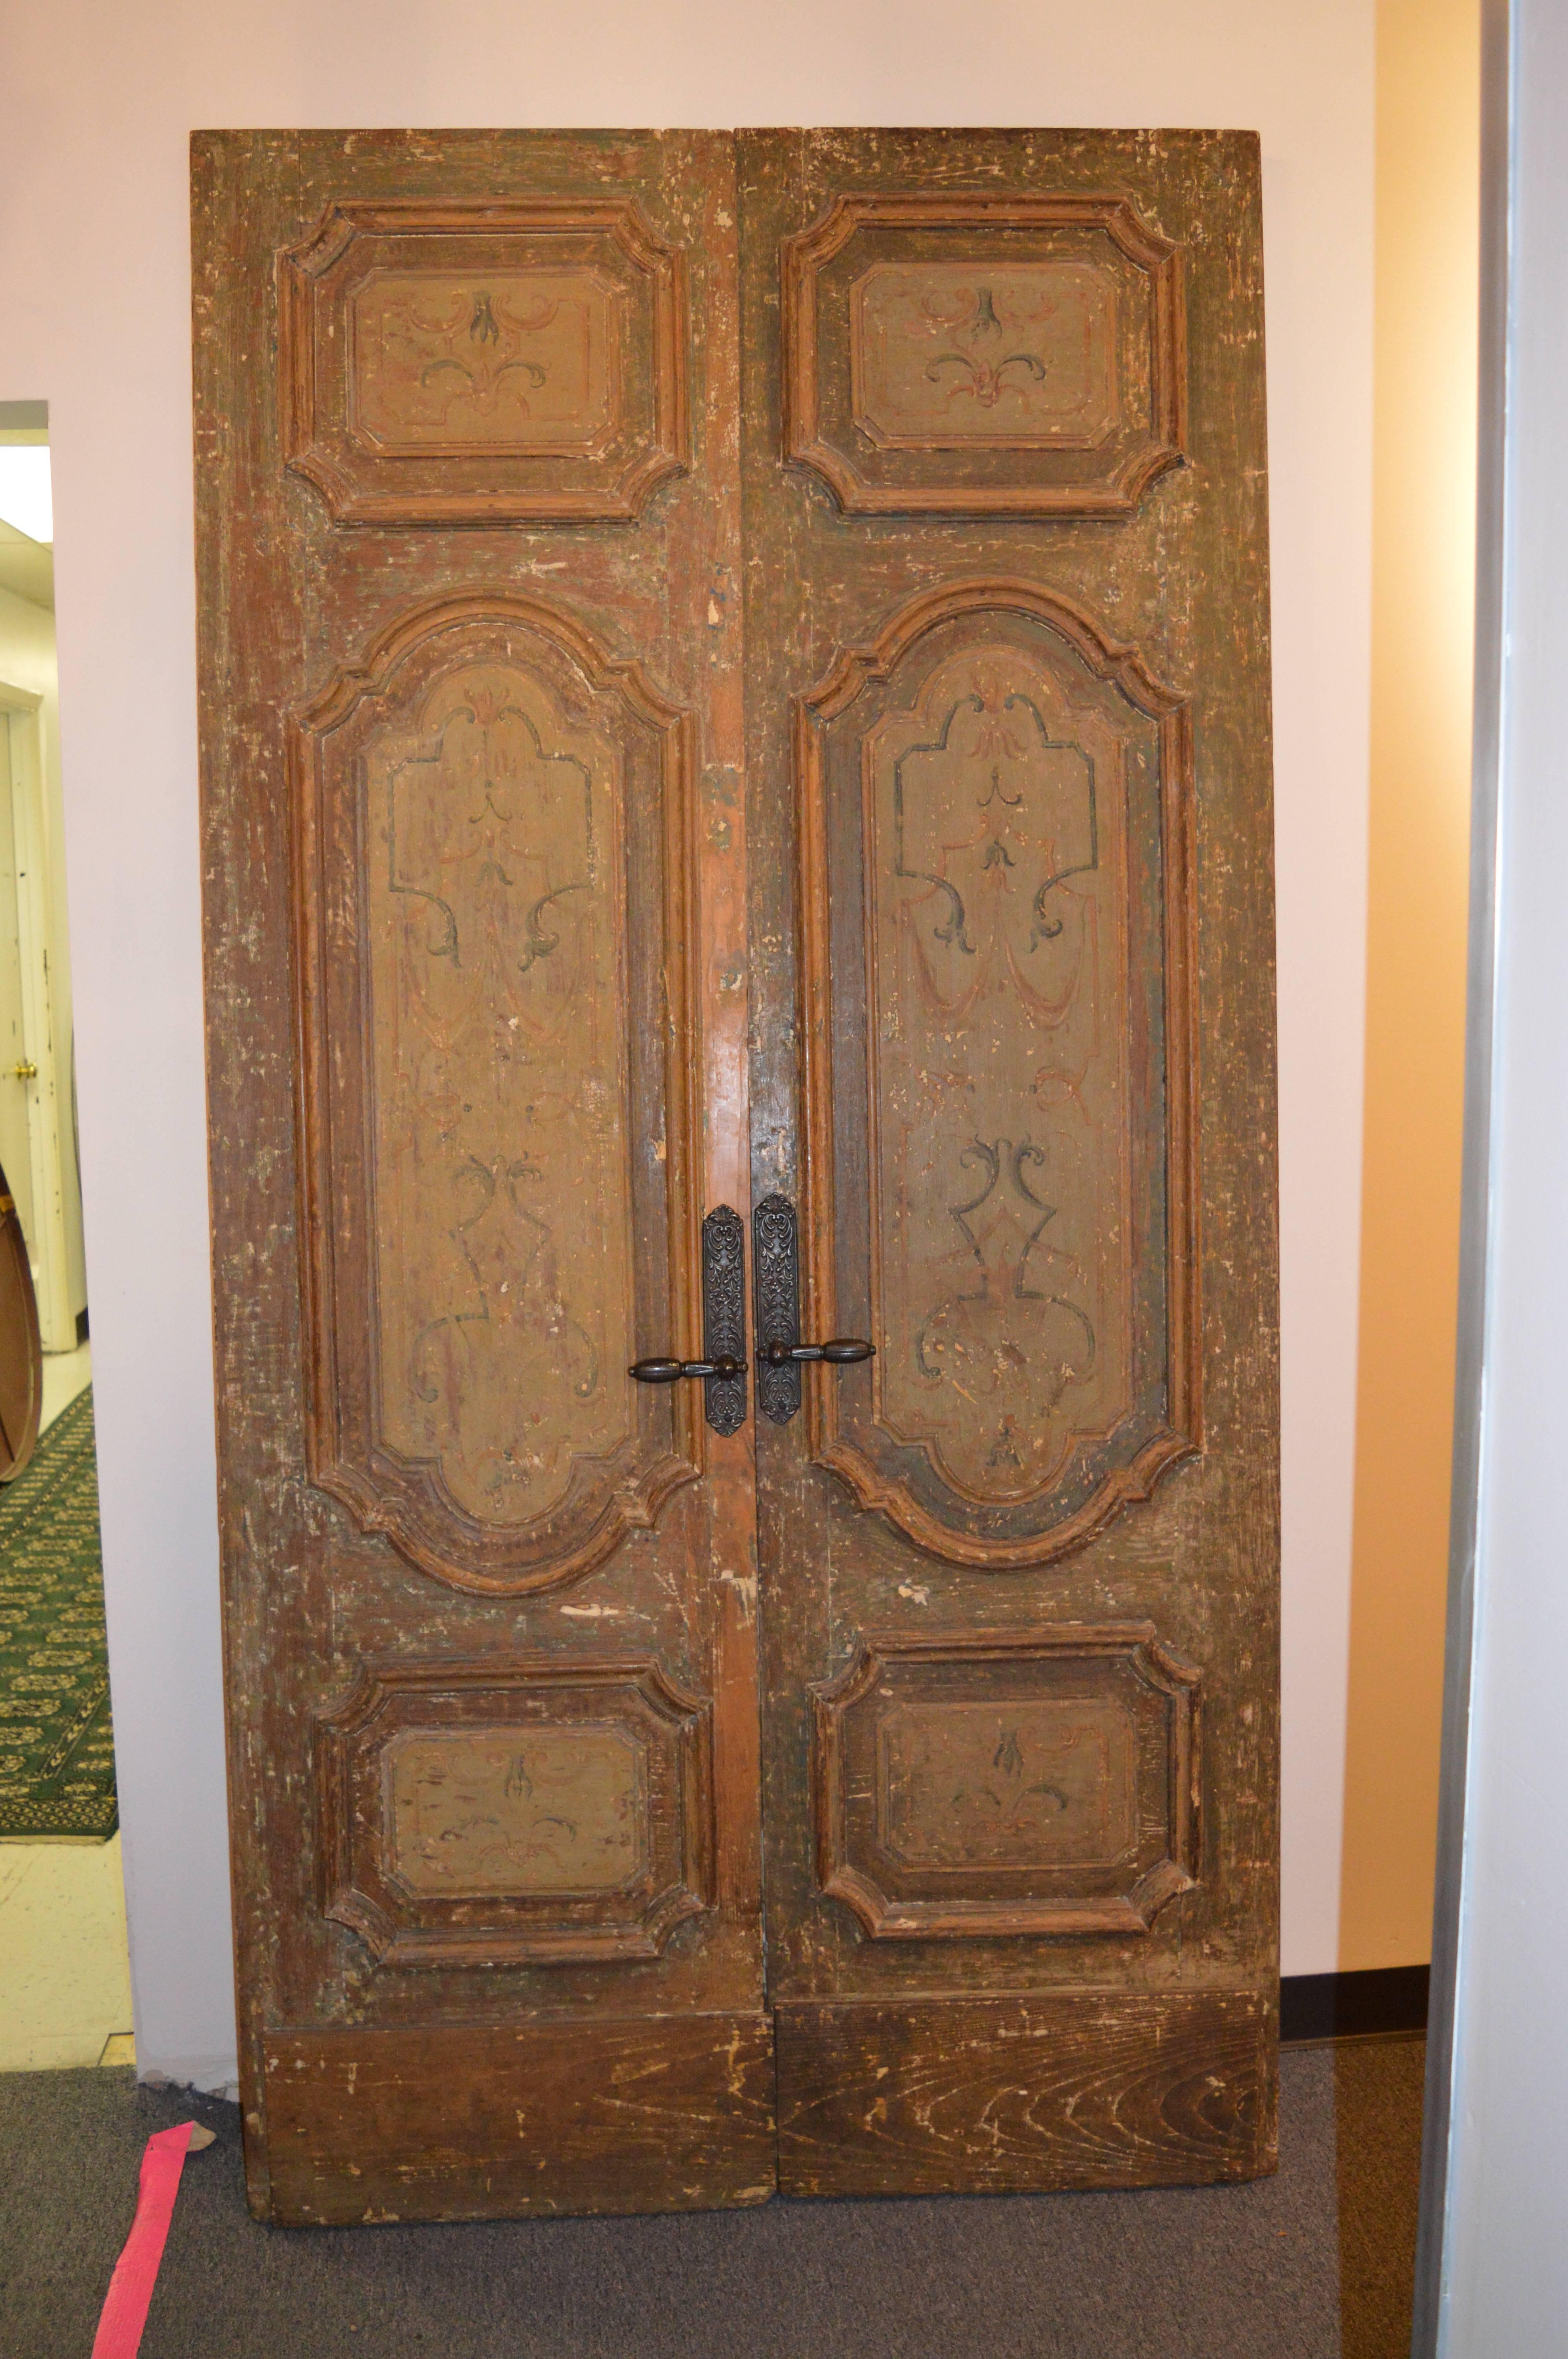 Wonderfully painted and aged pair of doors include the original hardware.

Probably originally brightly painted, they have muted with age.